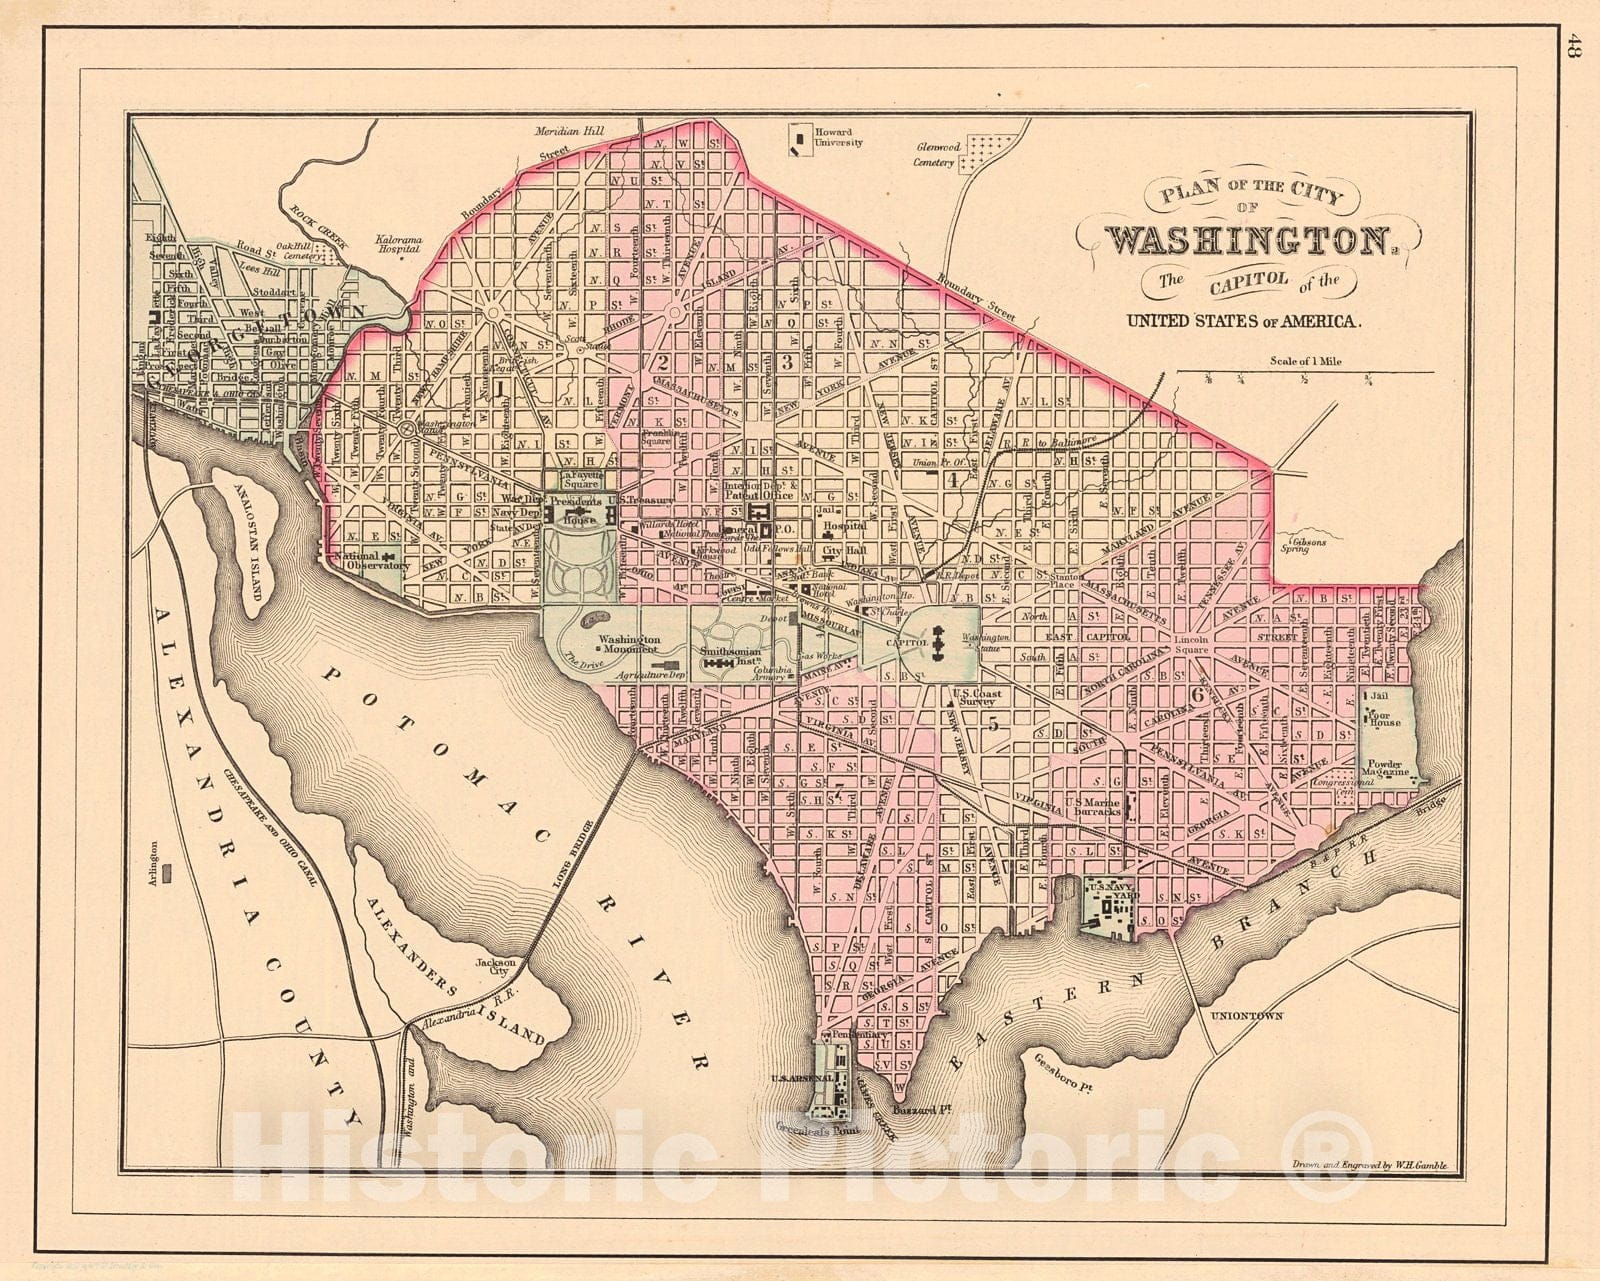 Historic Map : 1888 Plan of the City of Washington, the Capitol of the United States of America : Vintage Wall Art